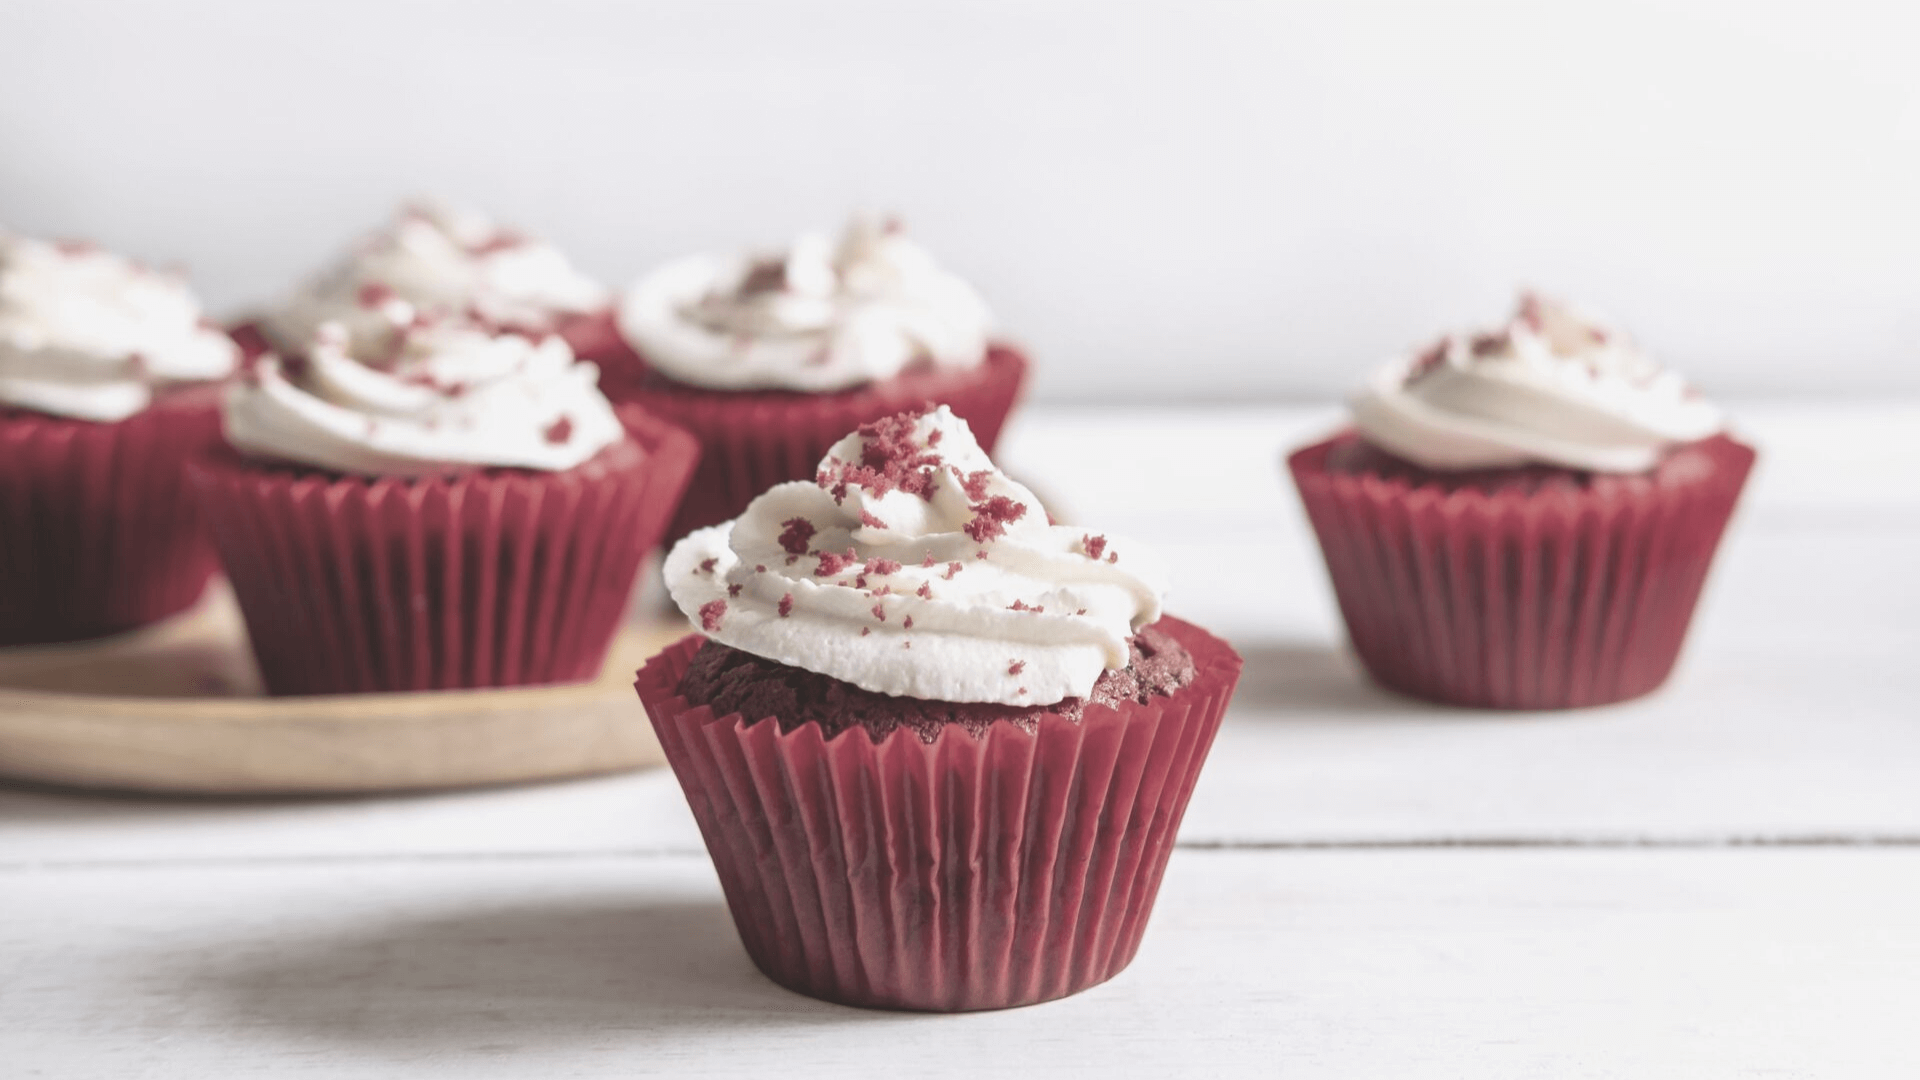 Mini Chocolate Peppermint Cupcakes with Peppermint Cream Cheese Frosting